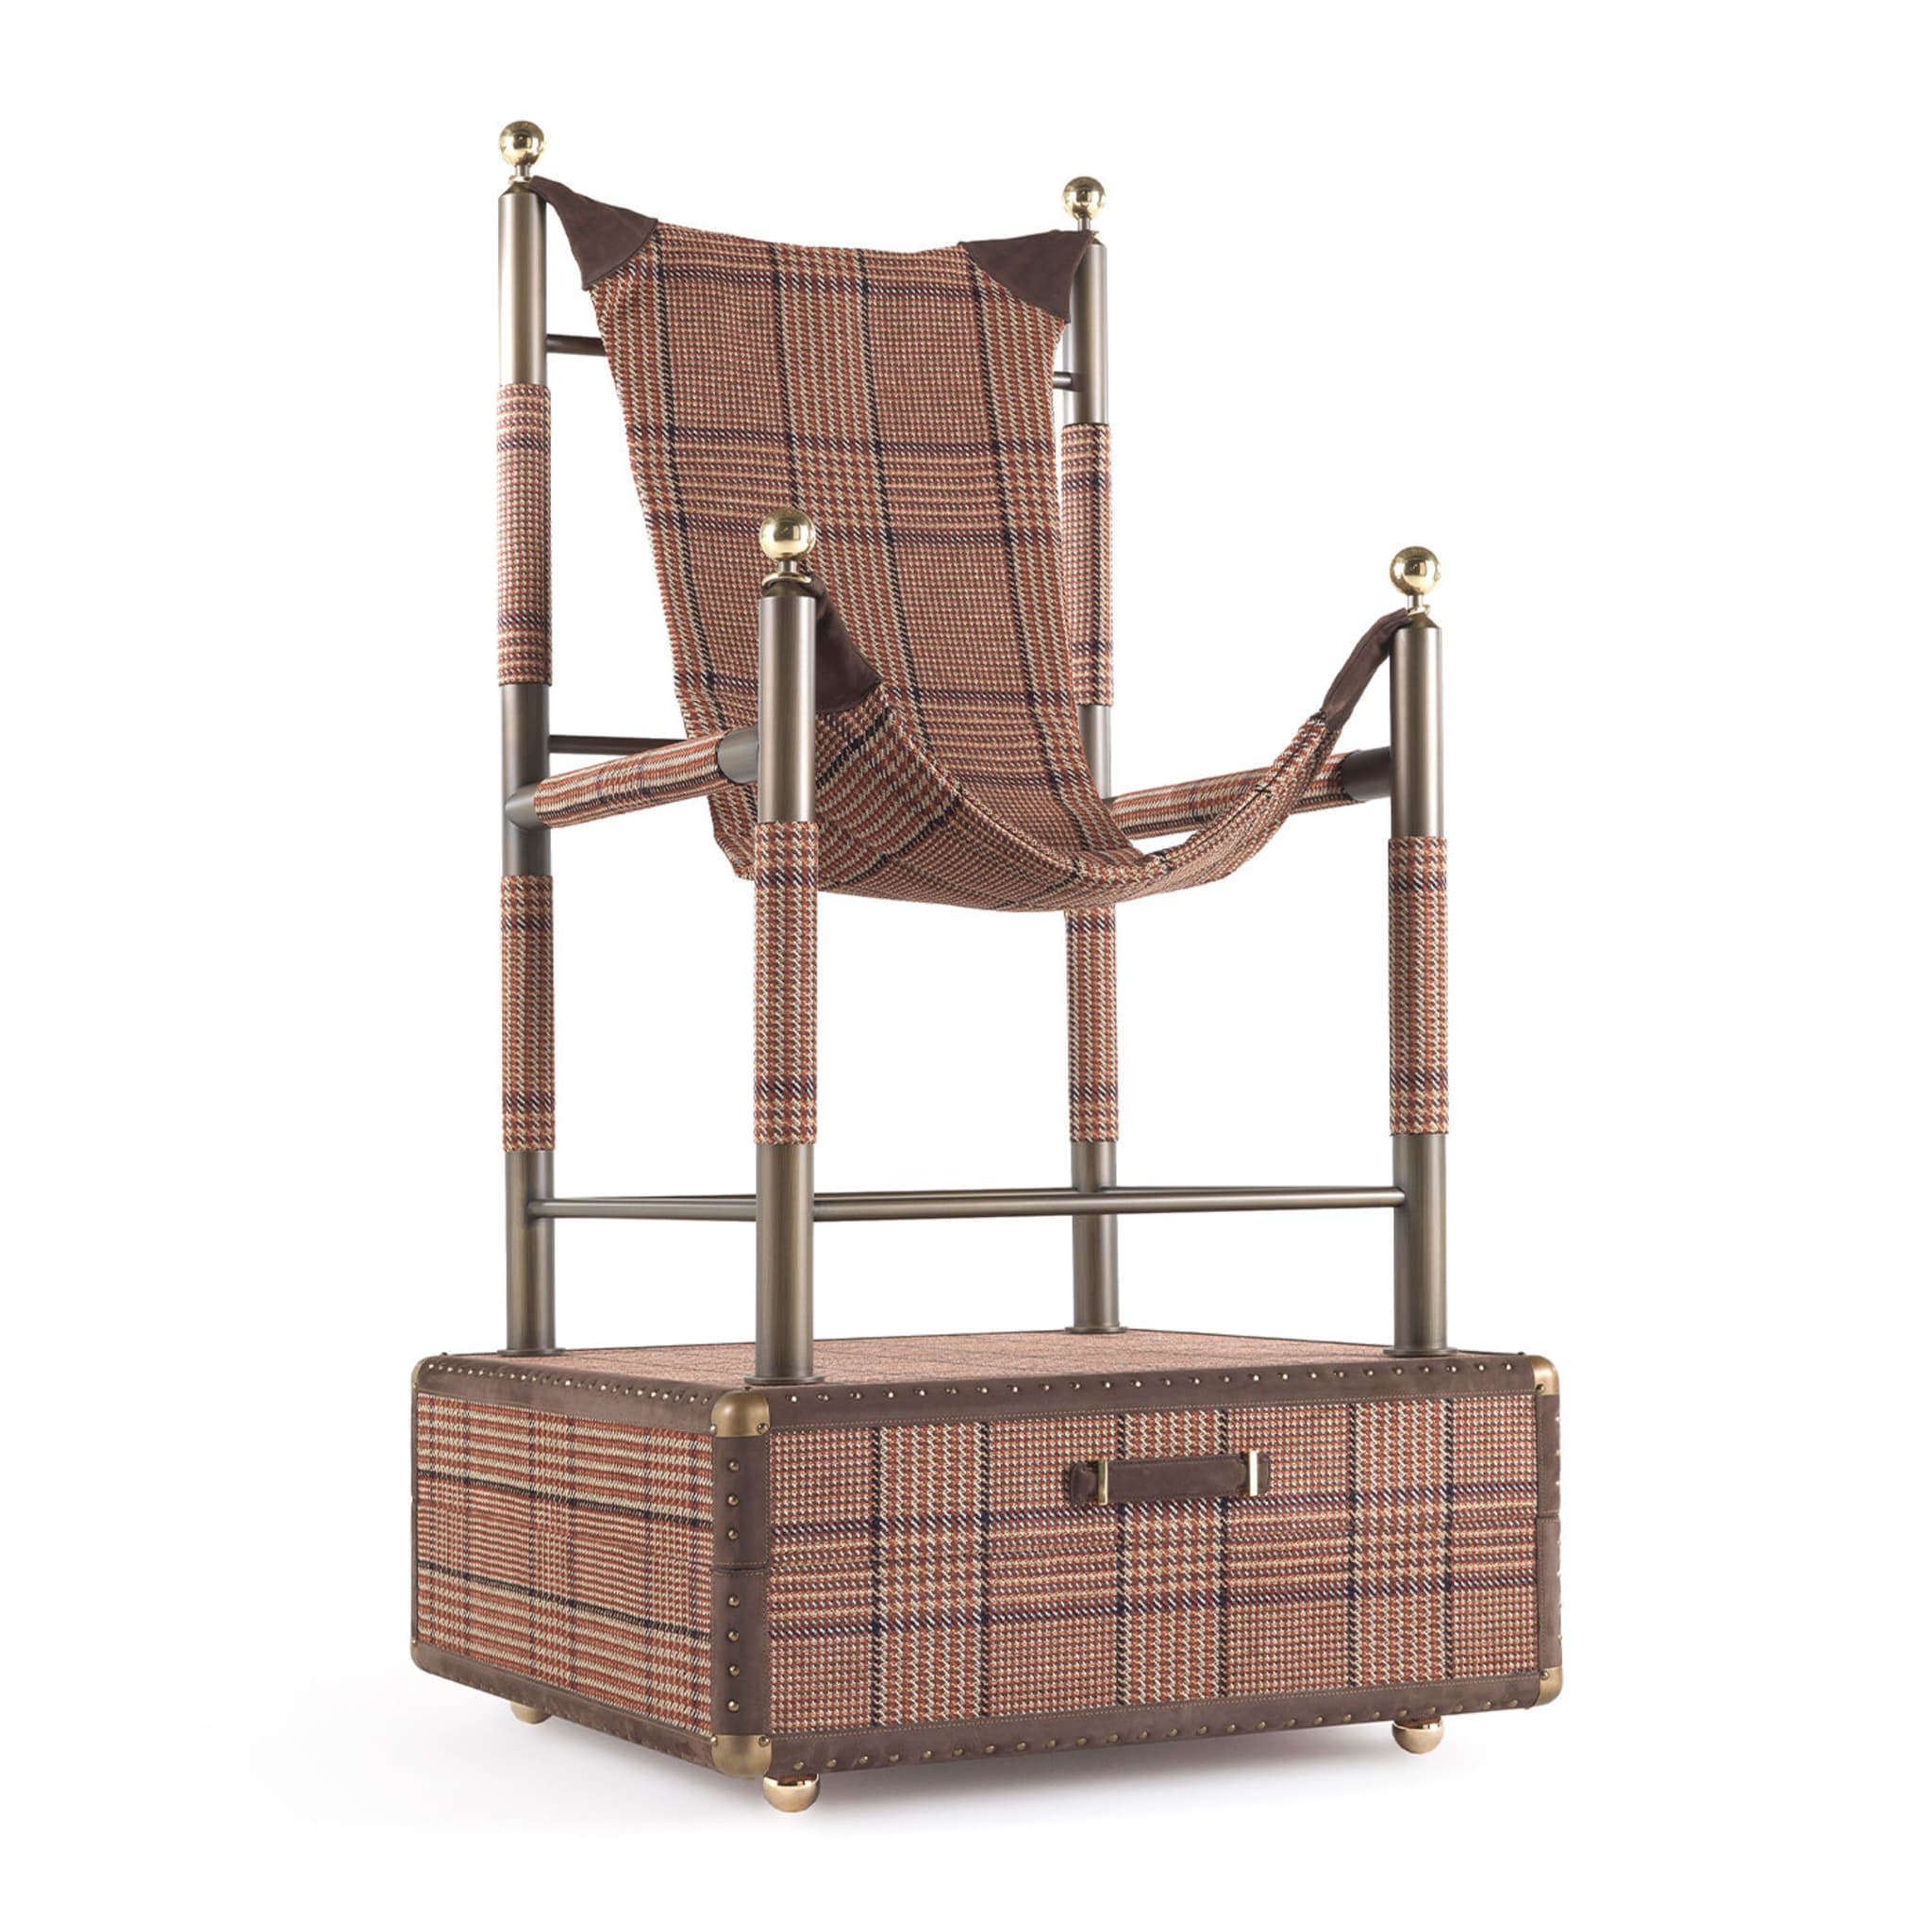 Babel Foldable Travel Chair and Trunk - Alternative view 1